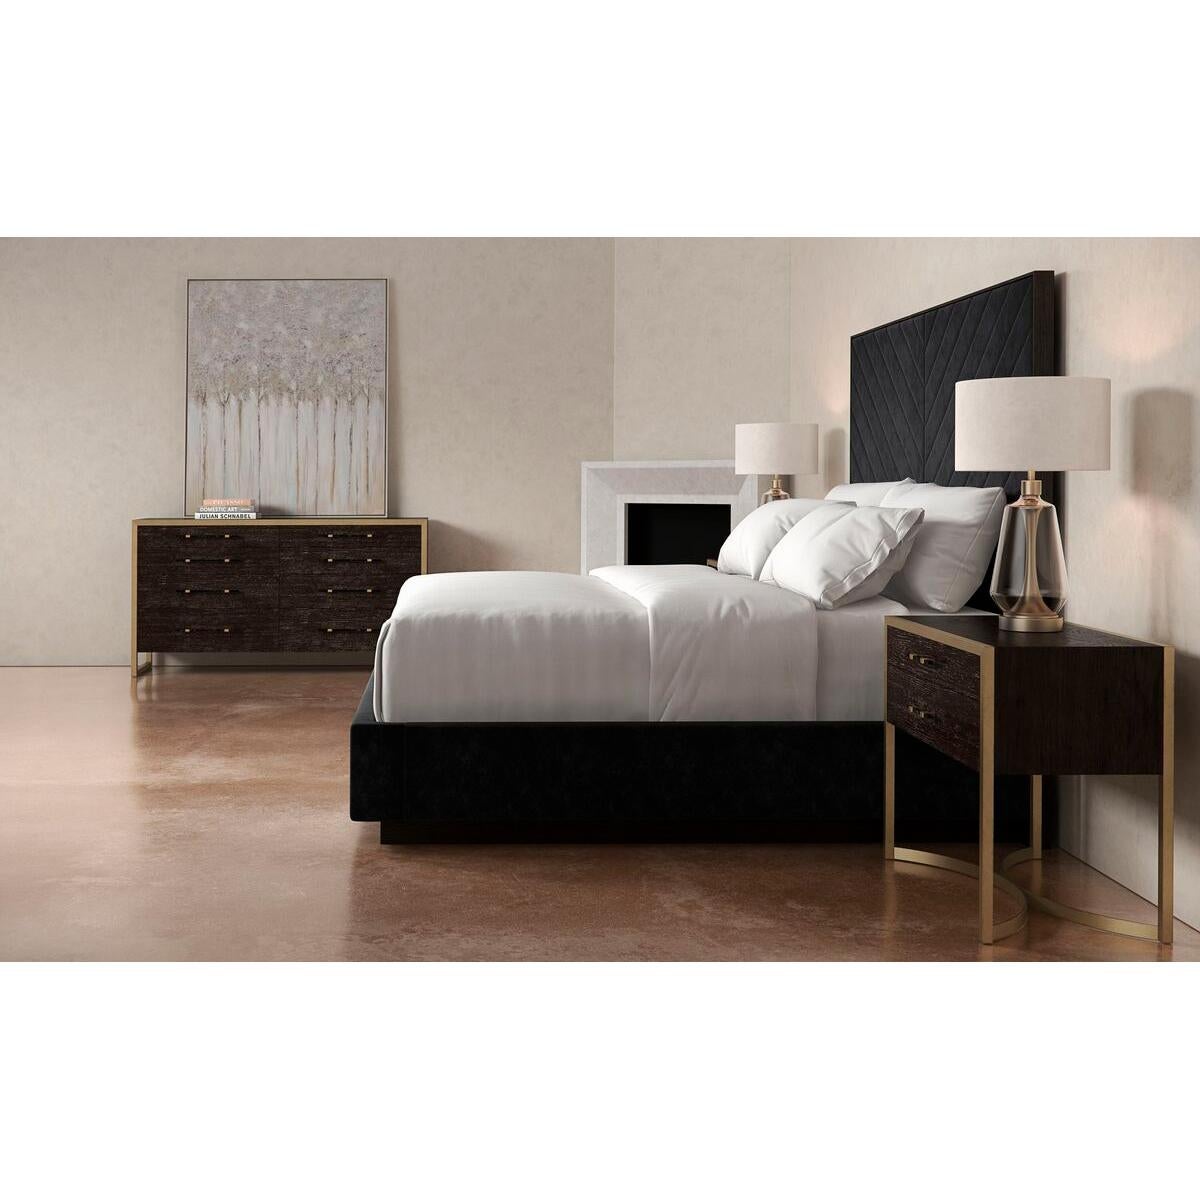 Upholstered Queen Bed with a black stain Ash finish frame. It has a tall upholstered headboard with a modern channel tufting design of converging angles that meet in the center to create a mesmerizing chevron. This bed’s fully finished sides appear